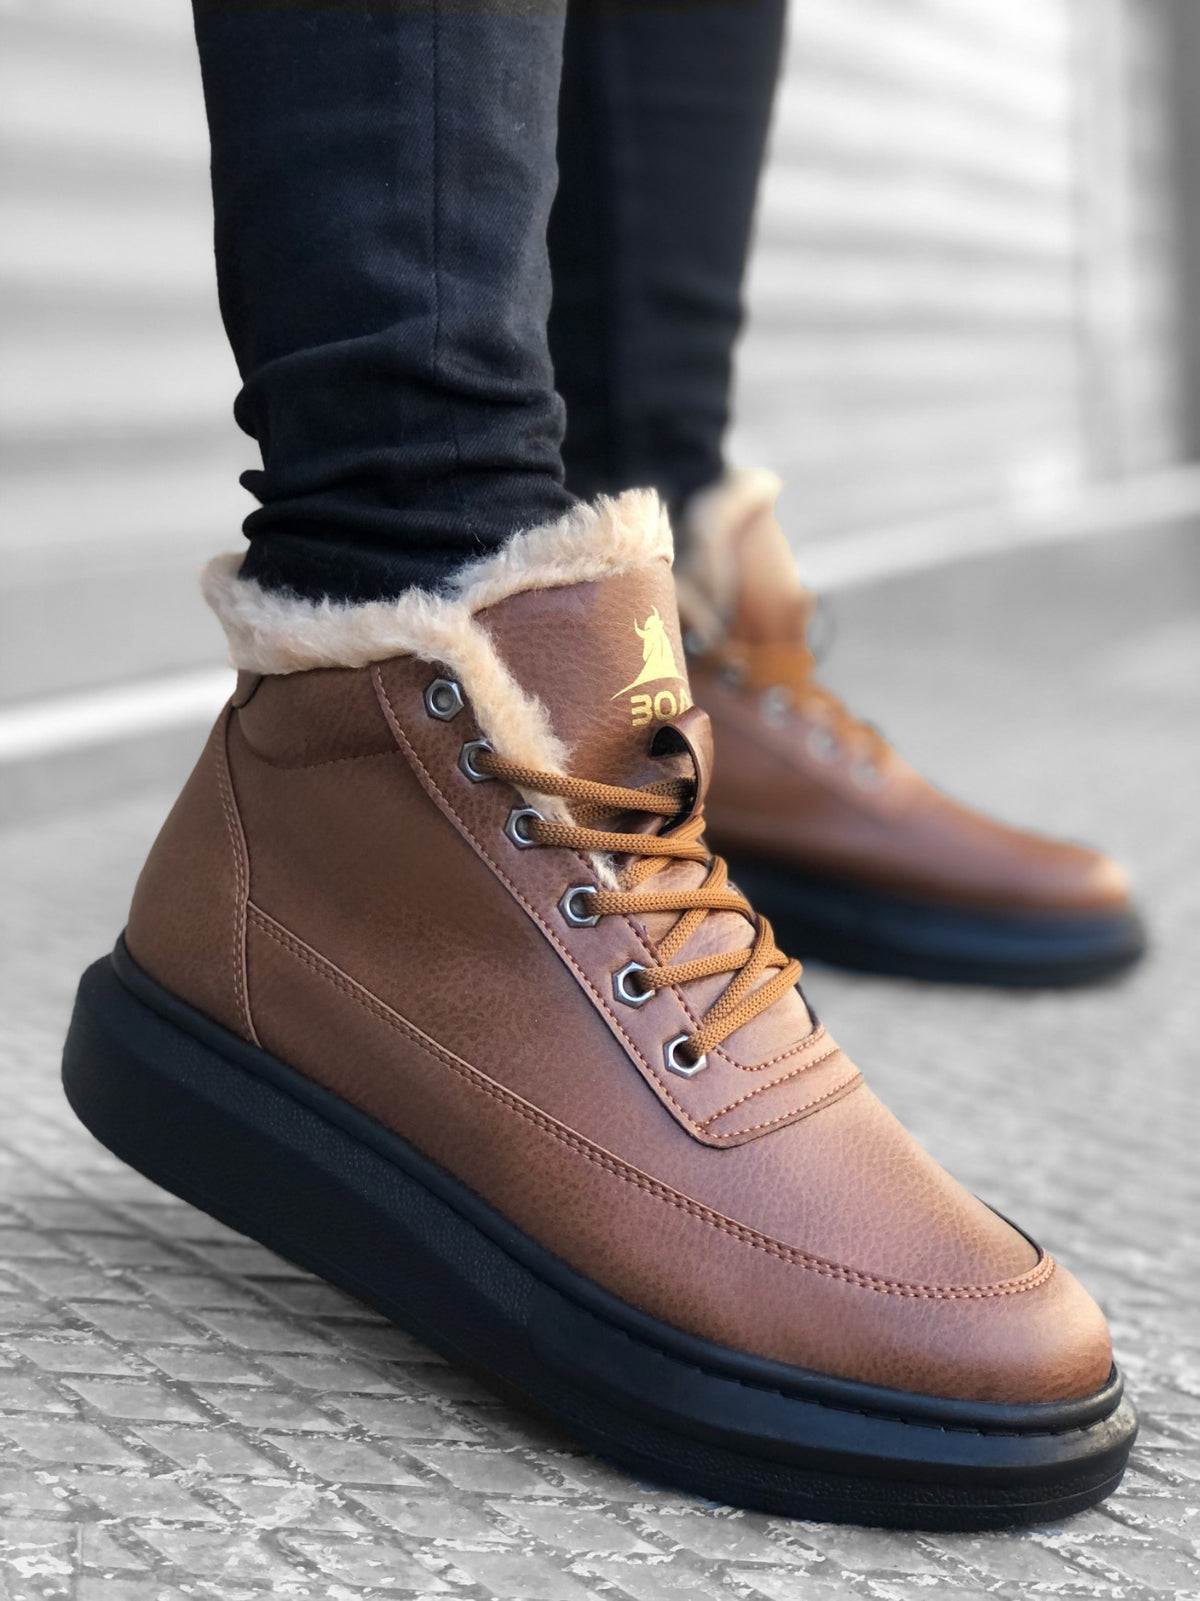 BA0151 Shearling Lace-up Tan Men's Style Sport Boots - STREETMODE ™